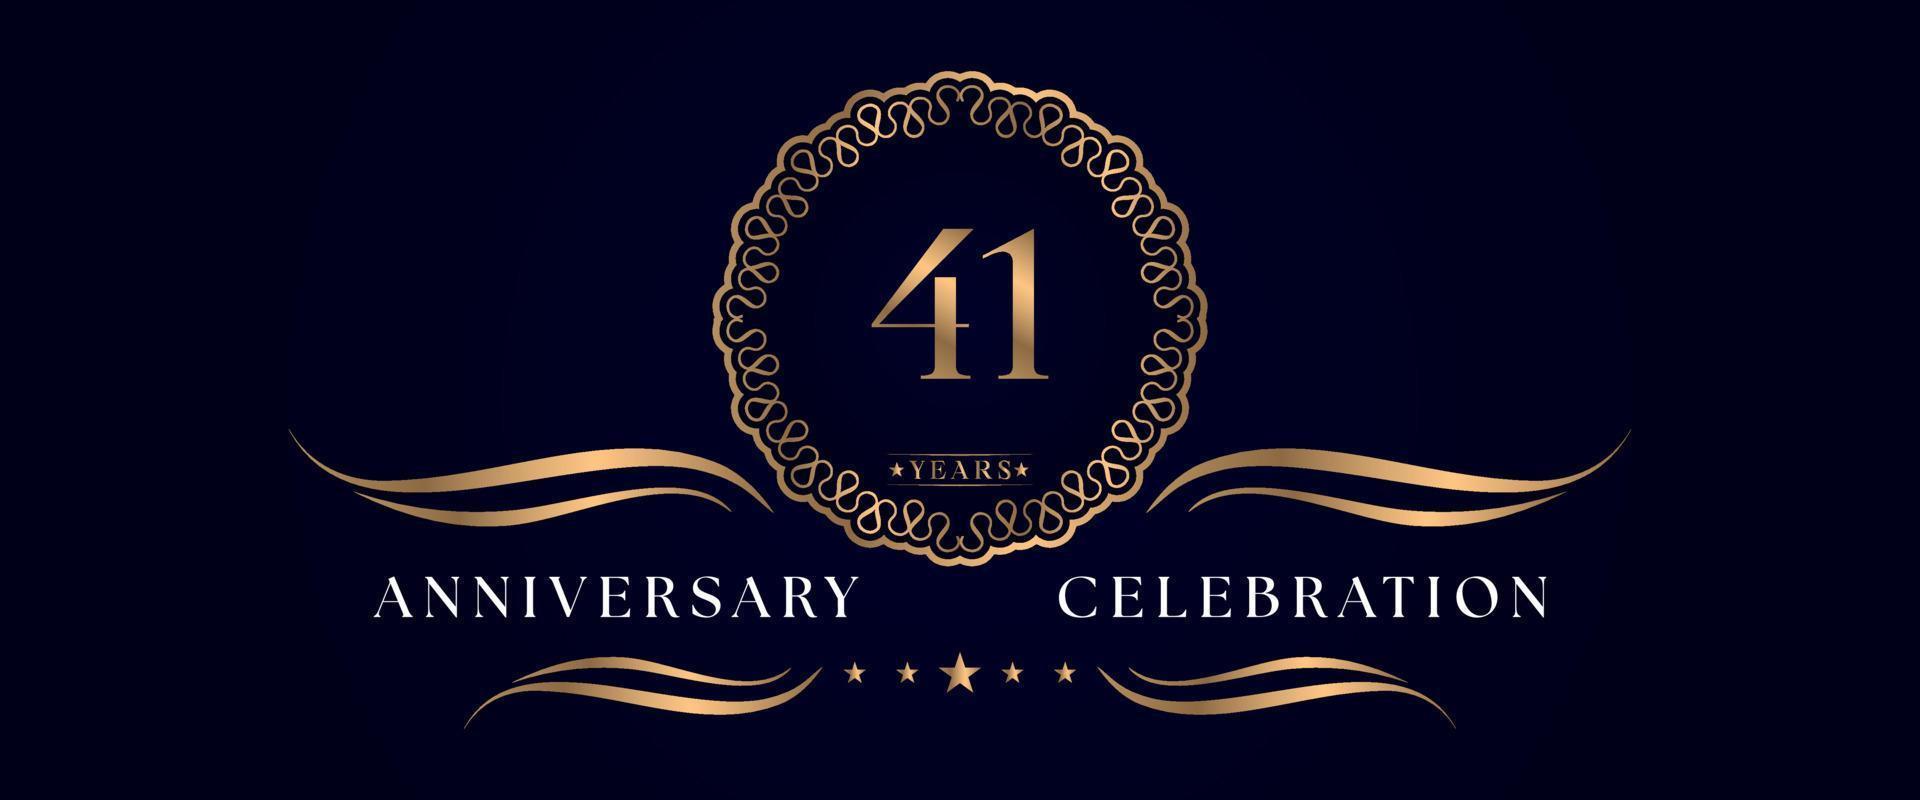 41 years anniversary celebration with elegant circle frame isolated on dark blue background. Vector design for greeting card, birthday party, wedding, event party, ceremony. 41 years Anniversary logo.